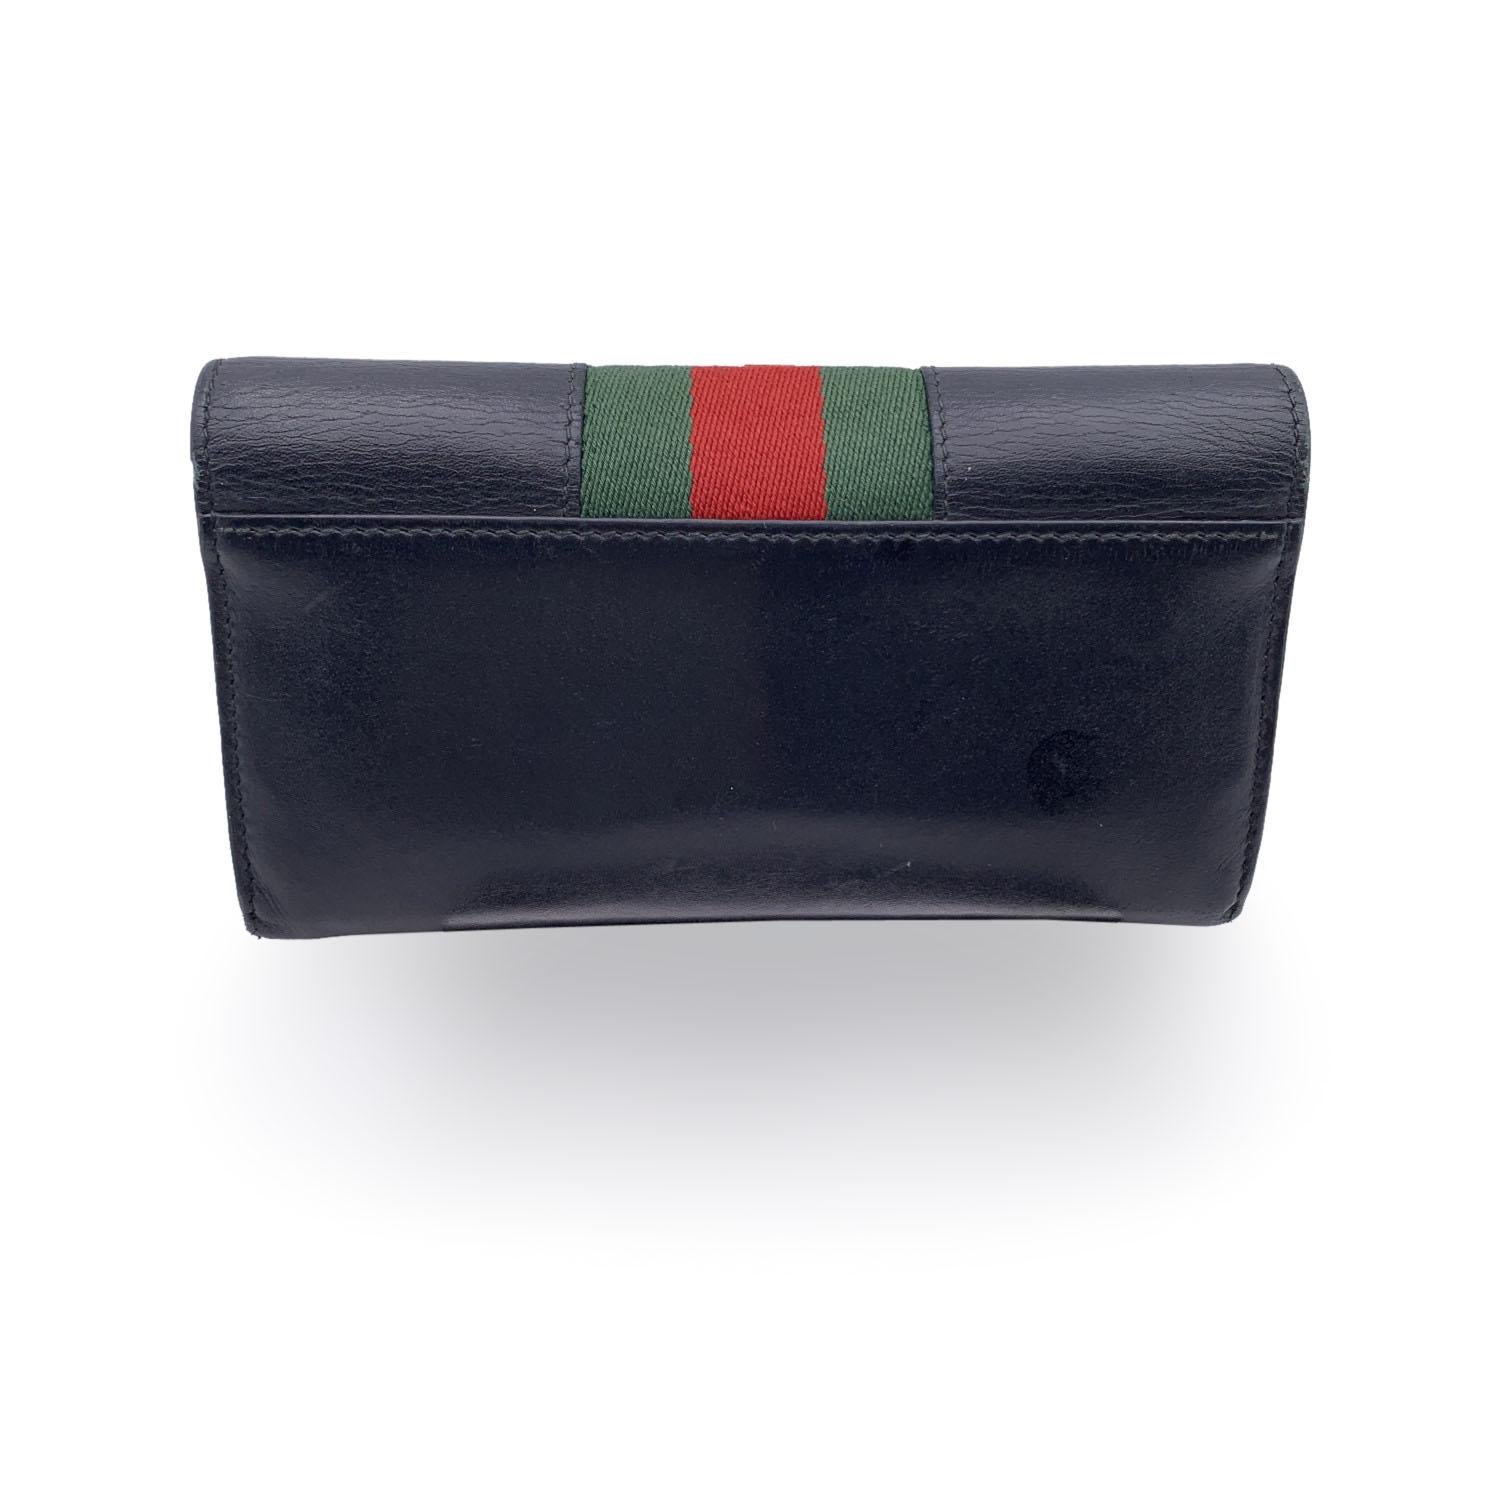 Beautiful Gucci 'Sylvie' Continental Wallet, crafted in black leather with gold metal buckle on the front. Leather interior. Inside it has: 12 credit card slots, 1 zip section for coins, 2 flat open pockets and 2 bill compartment. 'Gucci - Made in